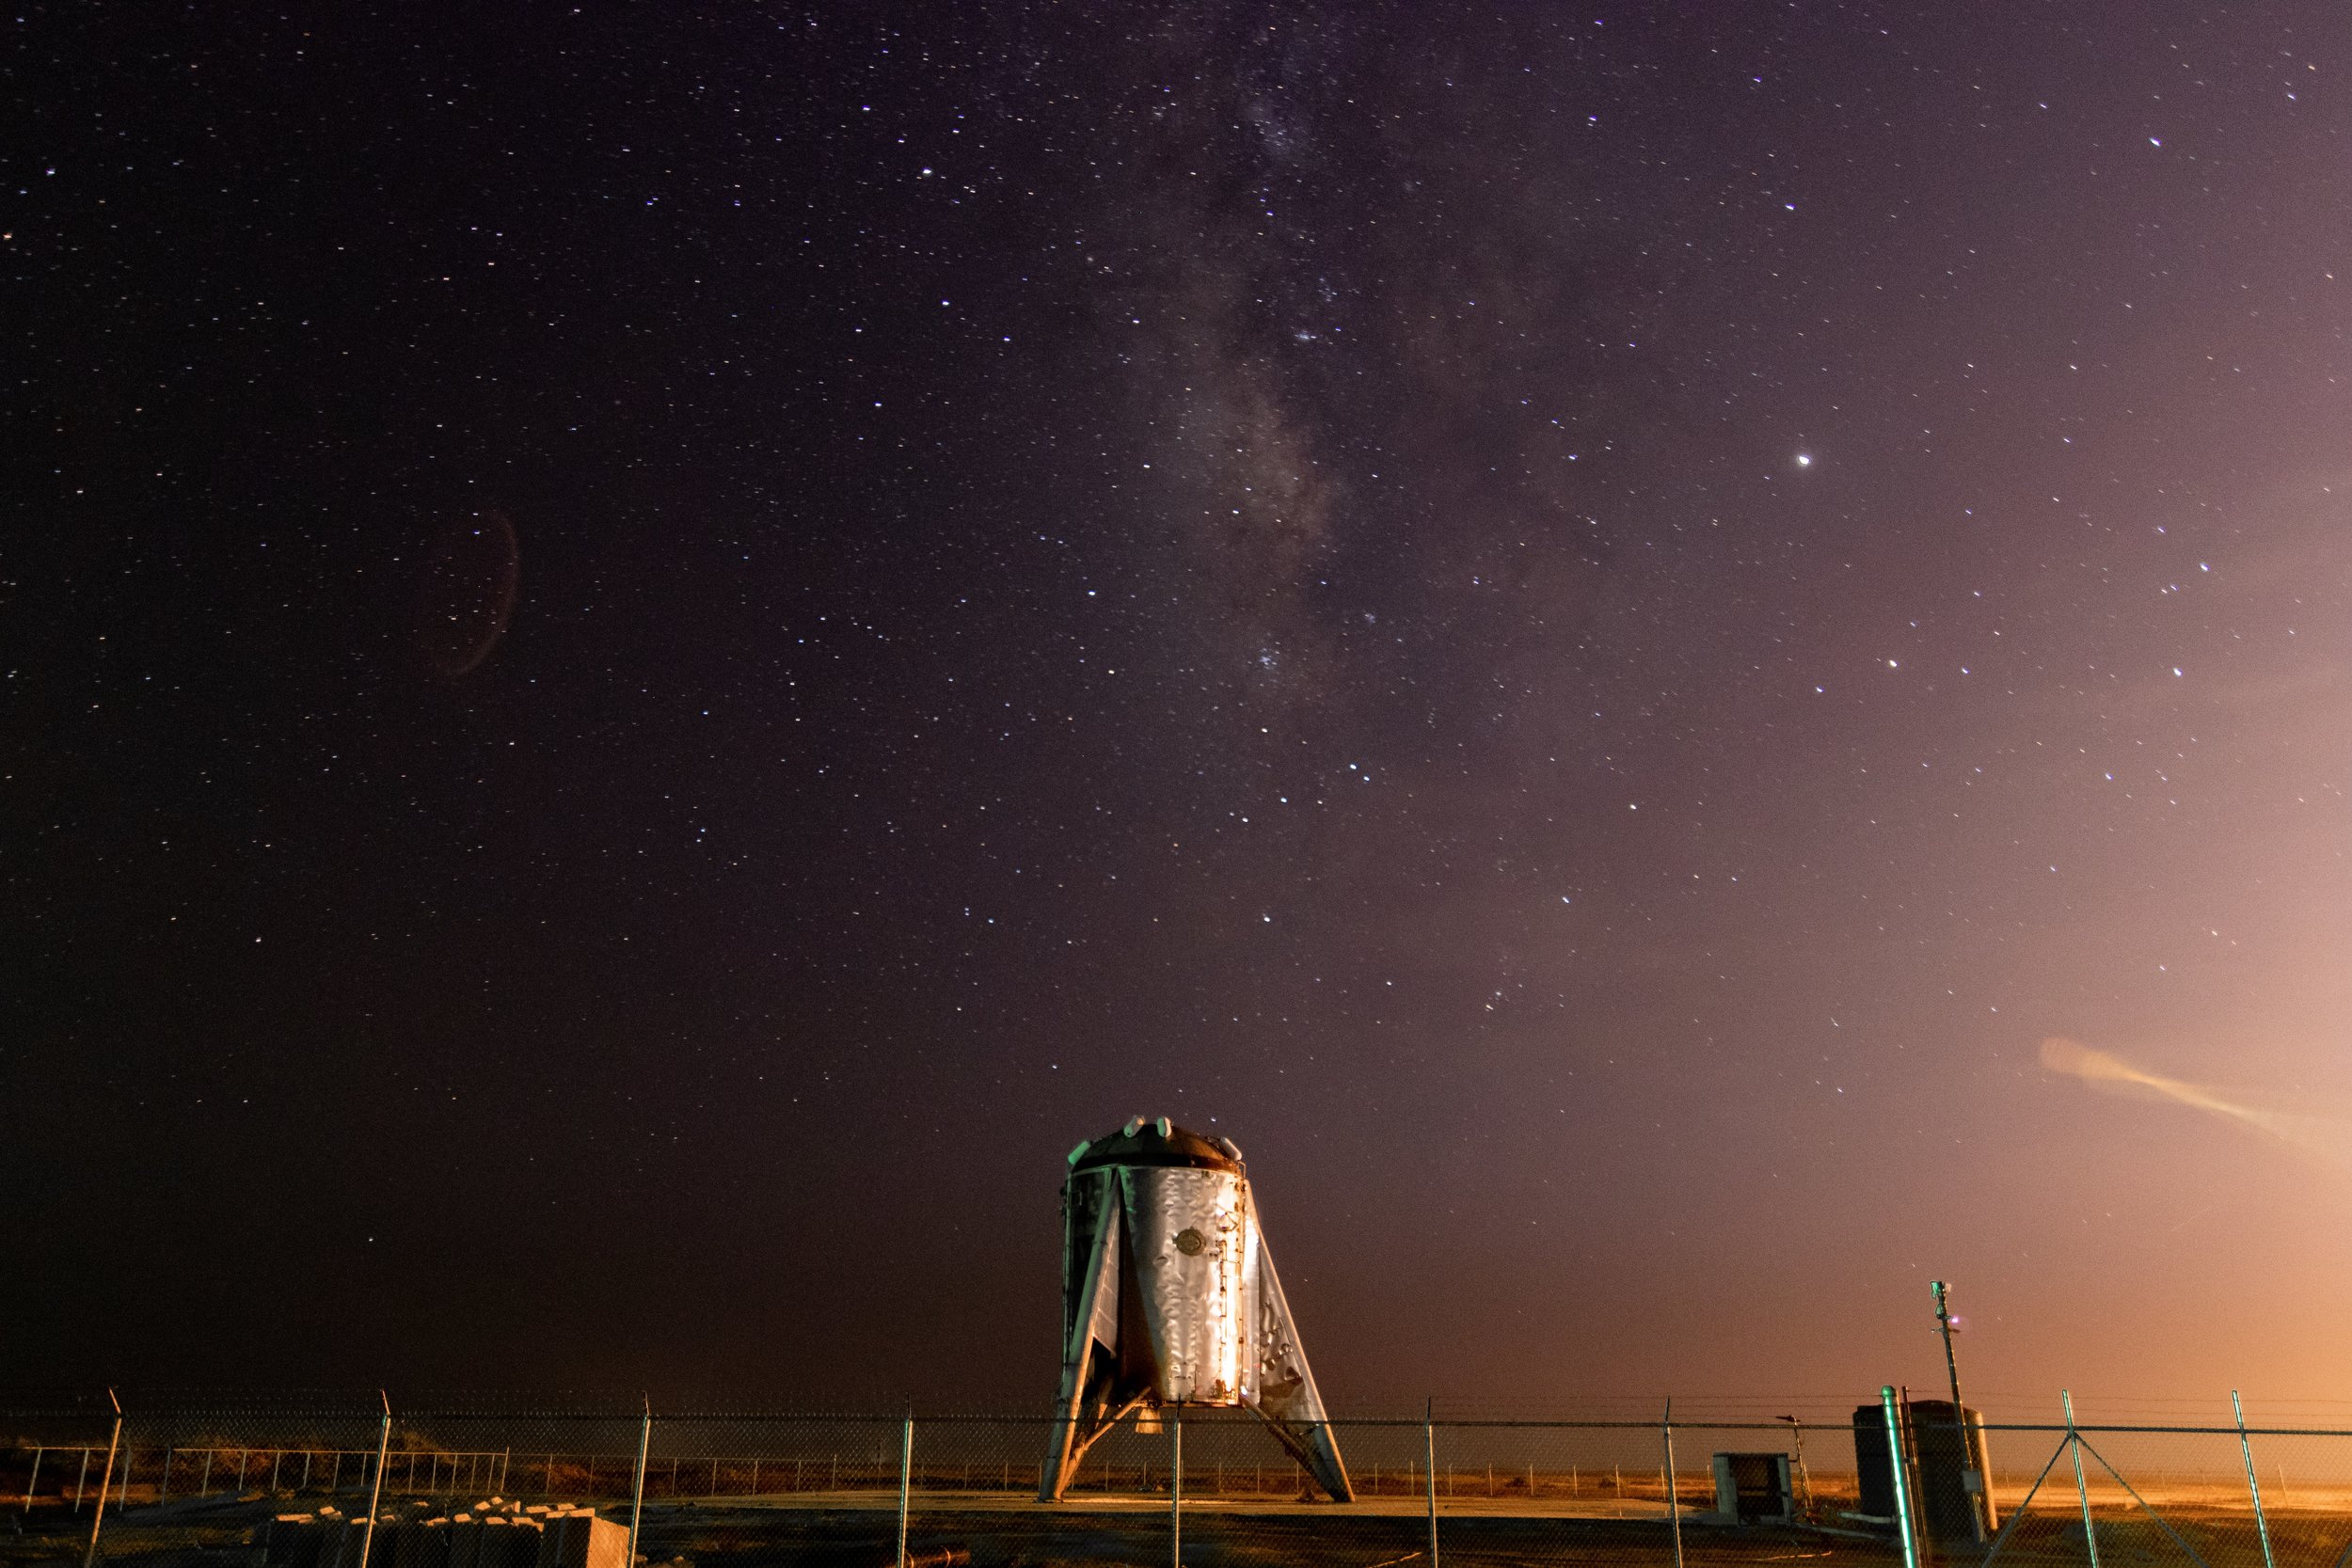 Starhopper and the Milky Way